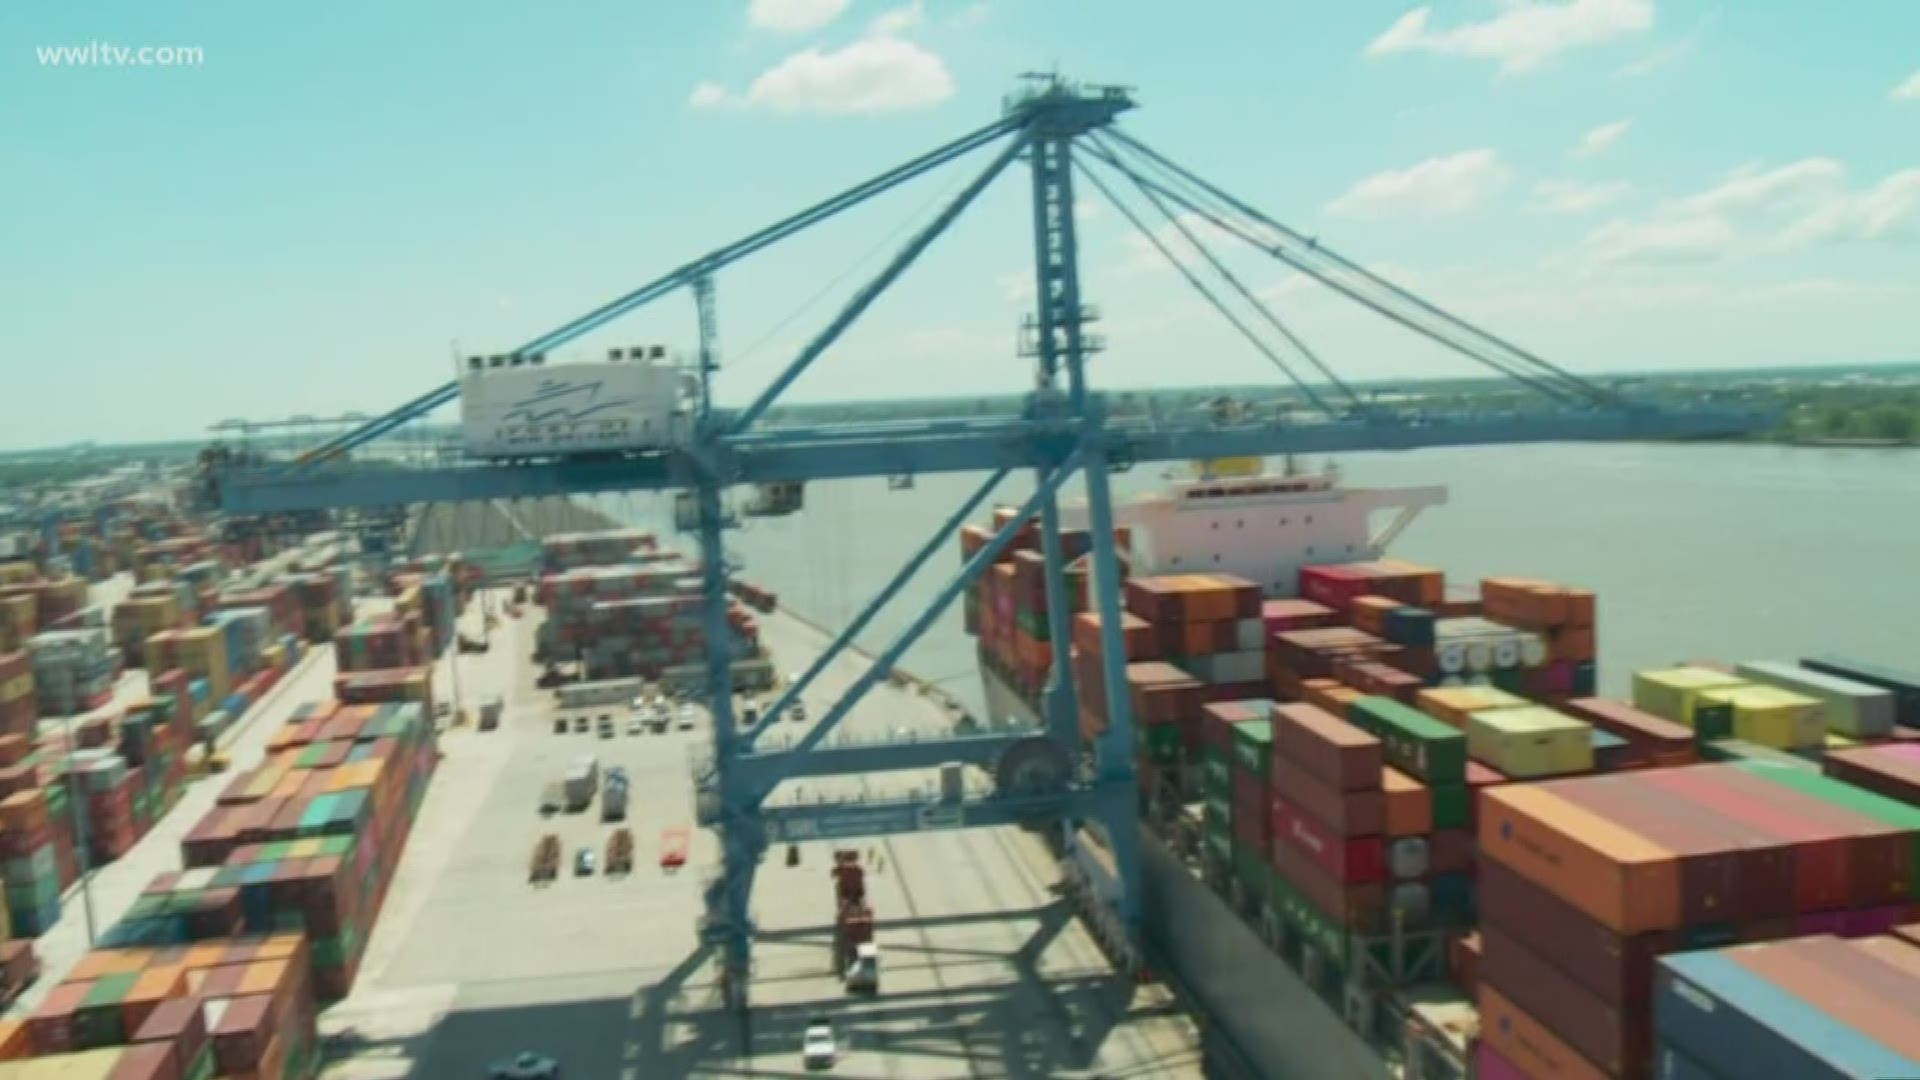 Eric Paulsen reports from the Mississippi River for National Maritime Day on how giant new cranes along the riverfront are helping the Port of new Orleans respond to growing demand and increase their capacity to handle cargo.